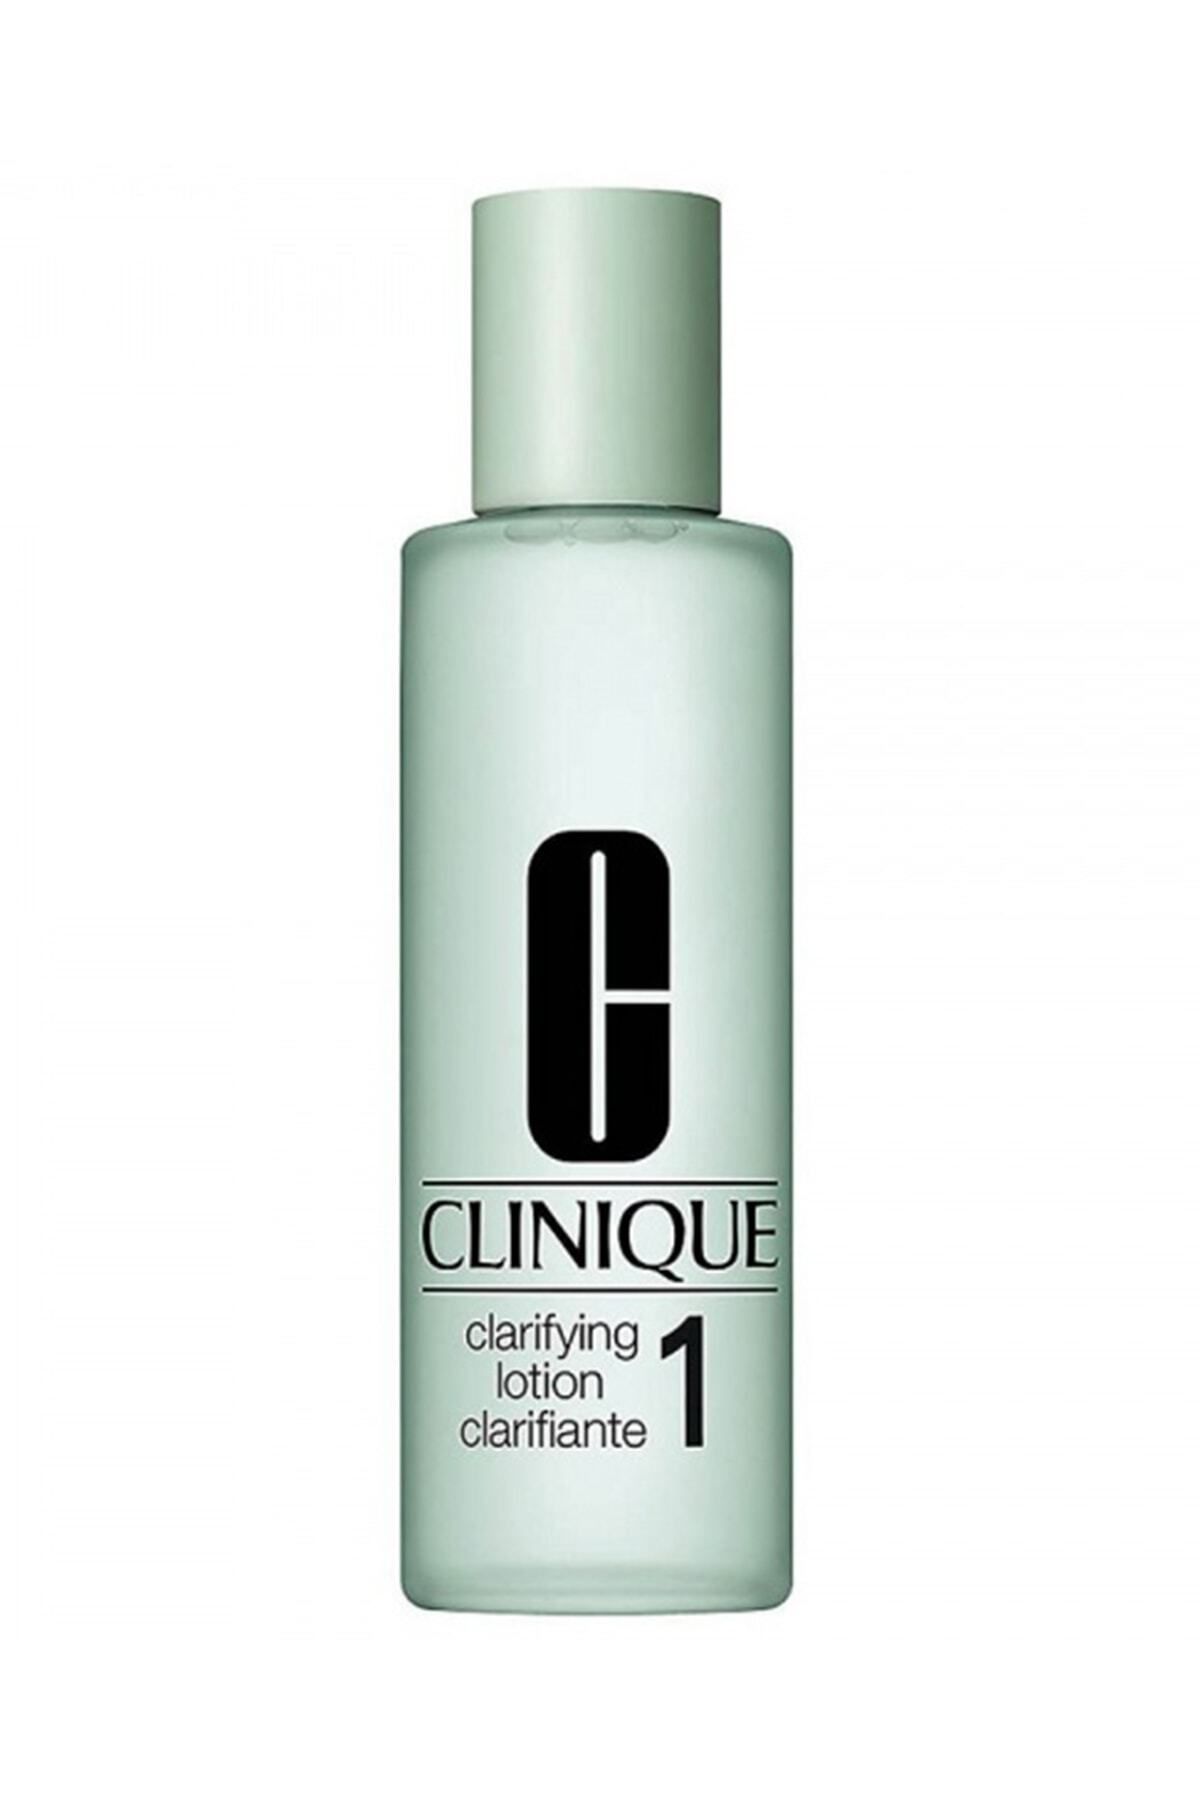 Clinique PURİFYİNG LOTİON - CLARİFYİNG LOTİON 1 DEMBA2049